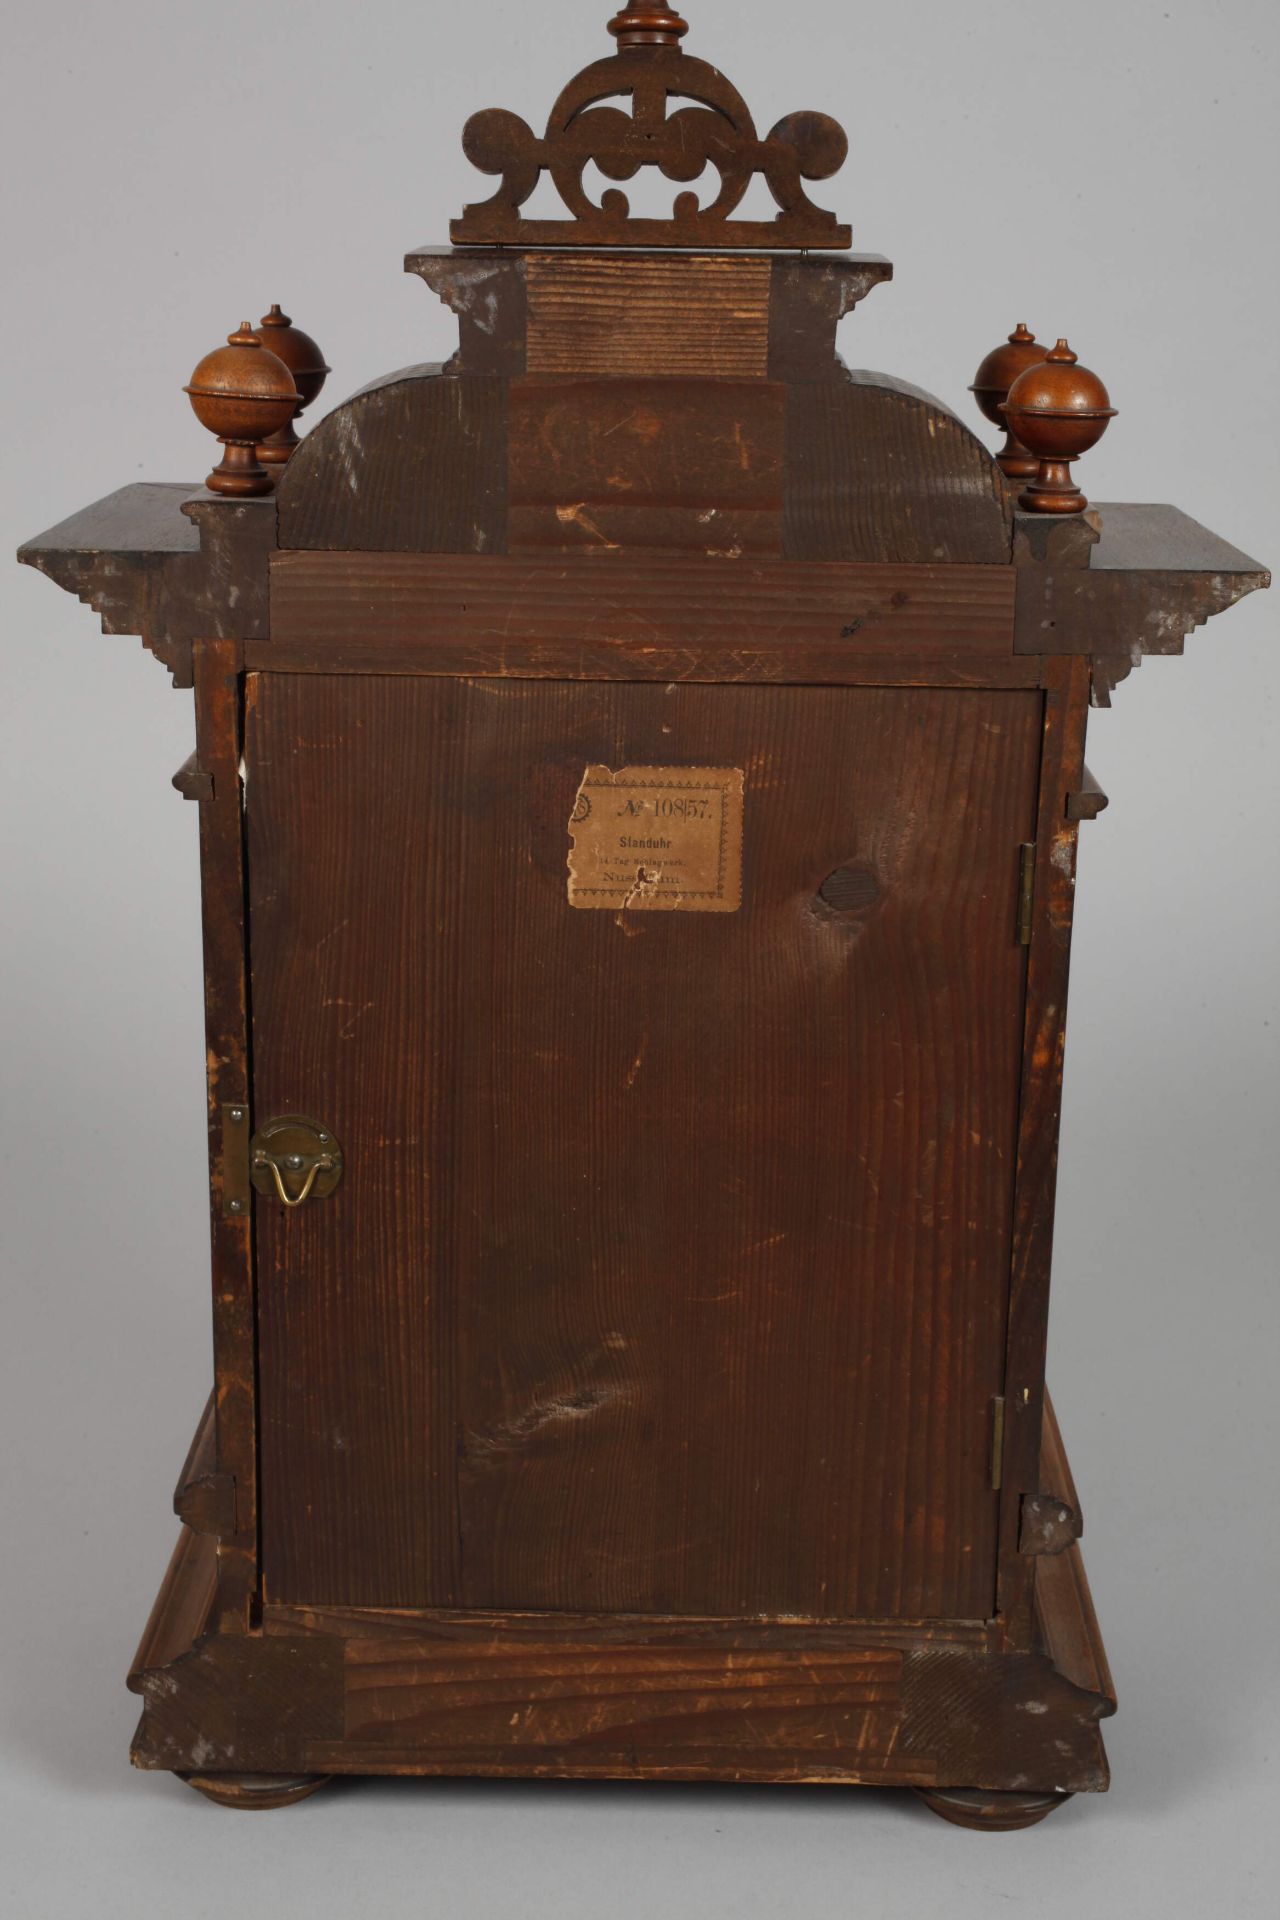 Founding period table clock LFS - Image 5 of 8